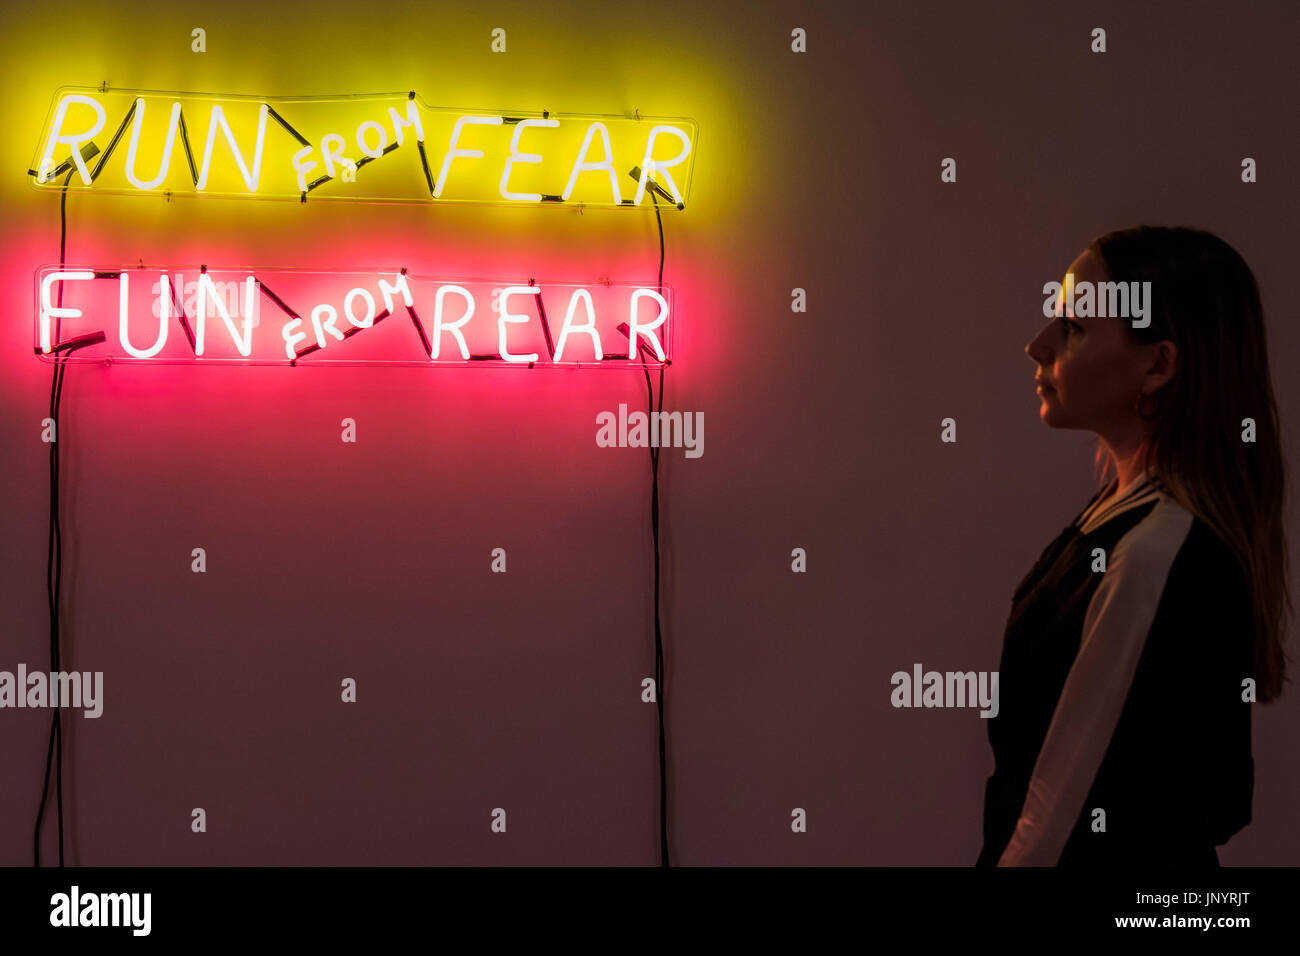 Run from Fear, Fun from Rear 1972 - works by Bruce Nauman in the ARTIST ROOMS, a new exhibition, is at Tate Modern from 24 July 2017 – July 2018. Stock Photo